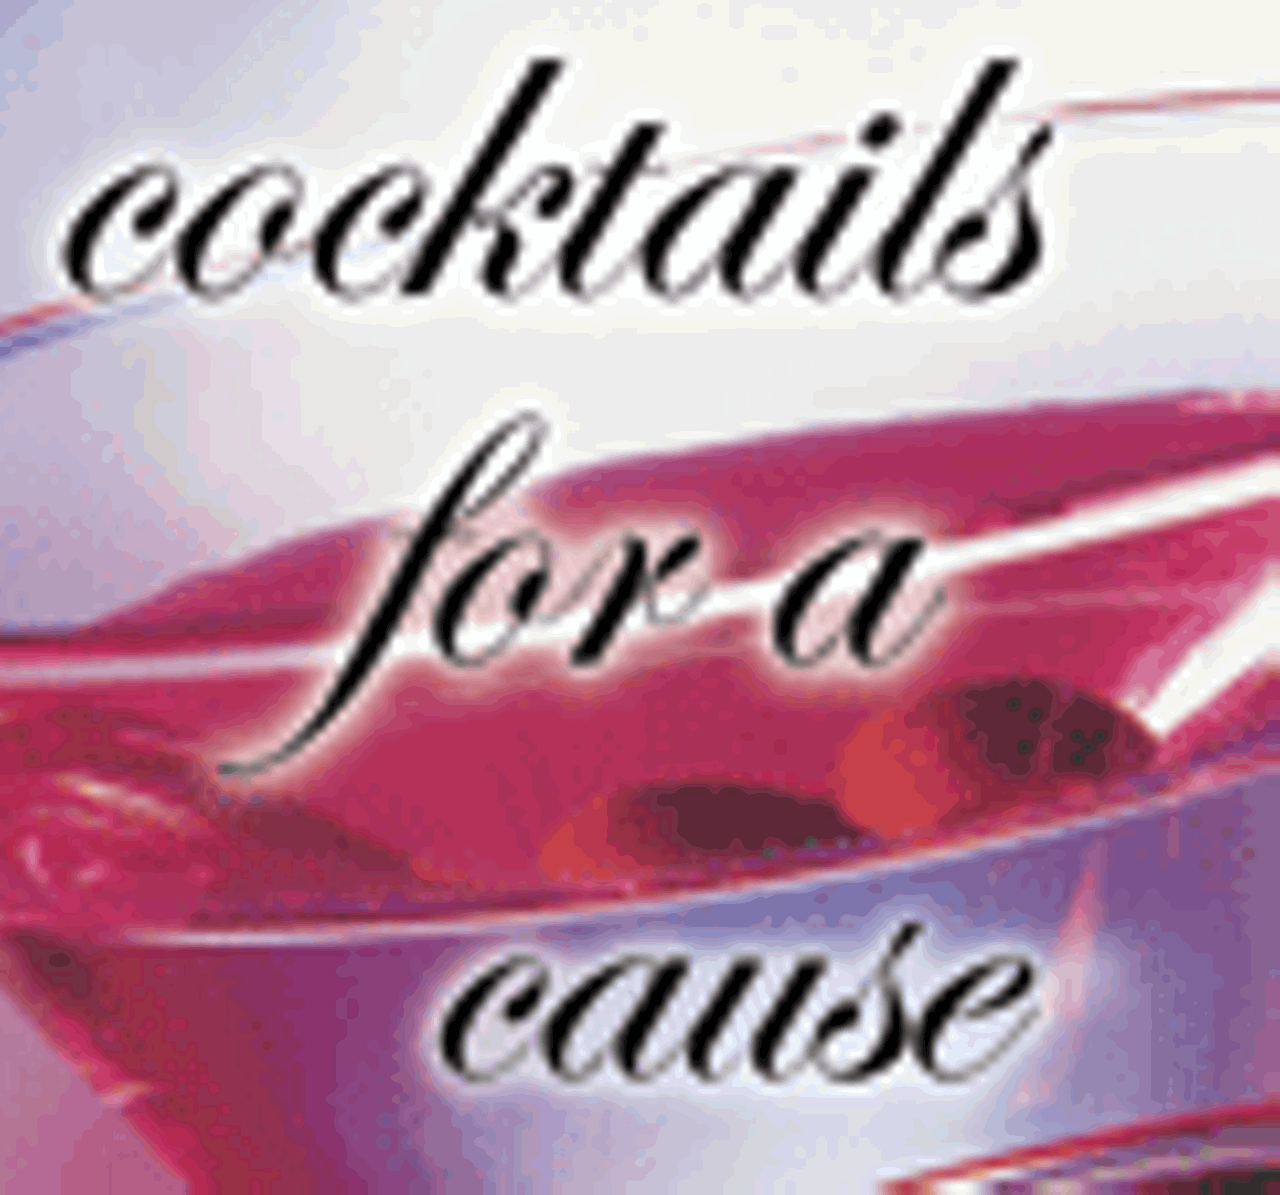 Cocktails for a Cause at Frazer's